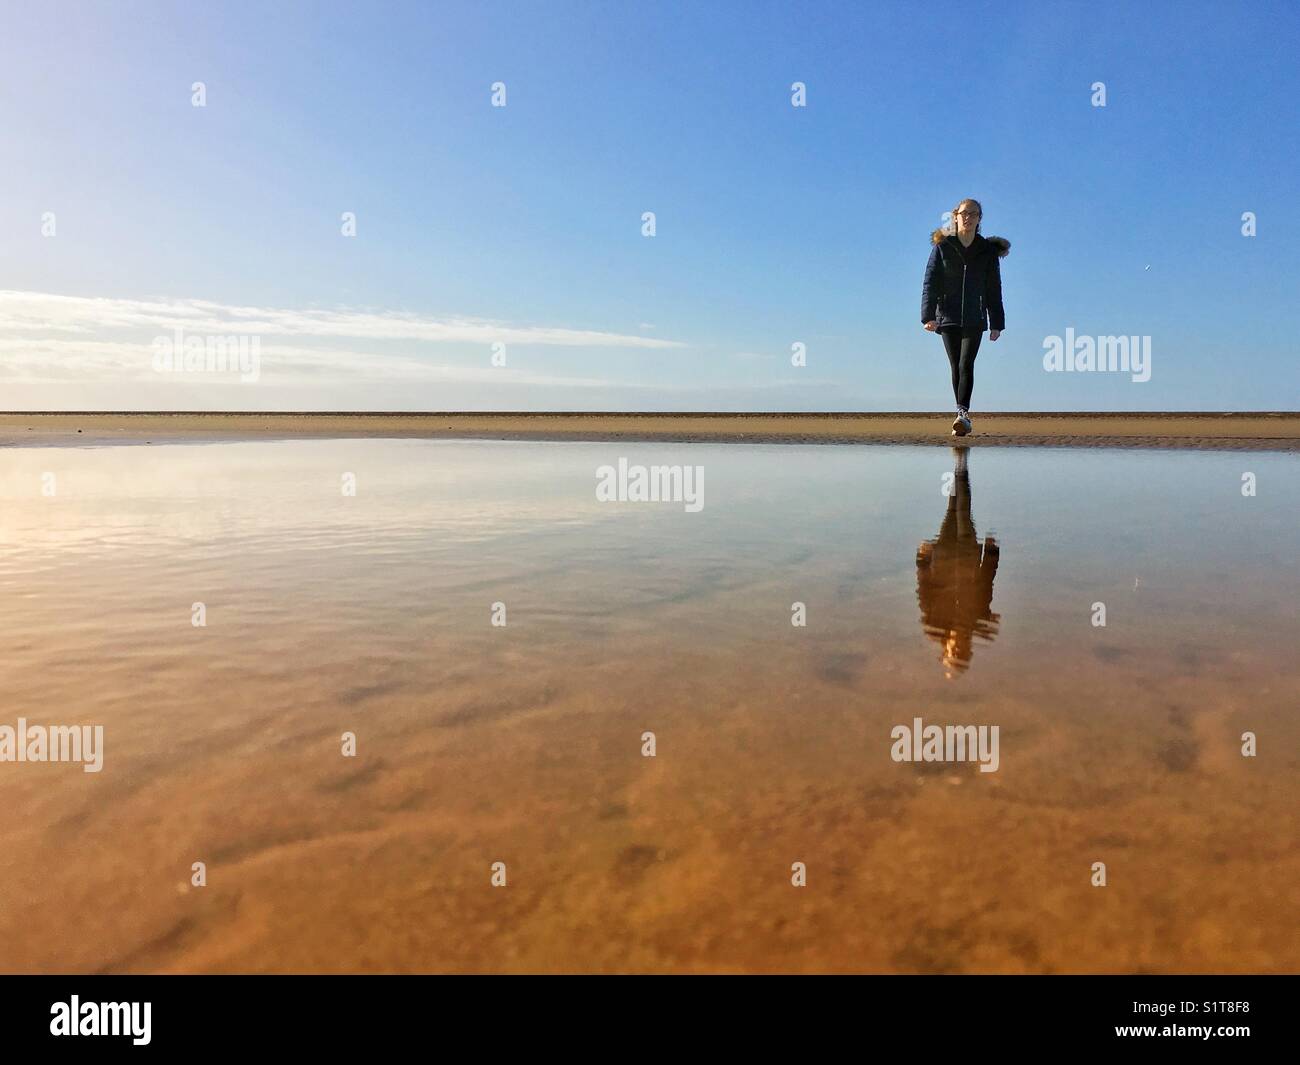 Young girl alone on beach Reflected in pool of water at low tide Stock Photo